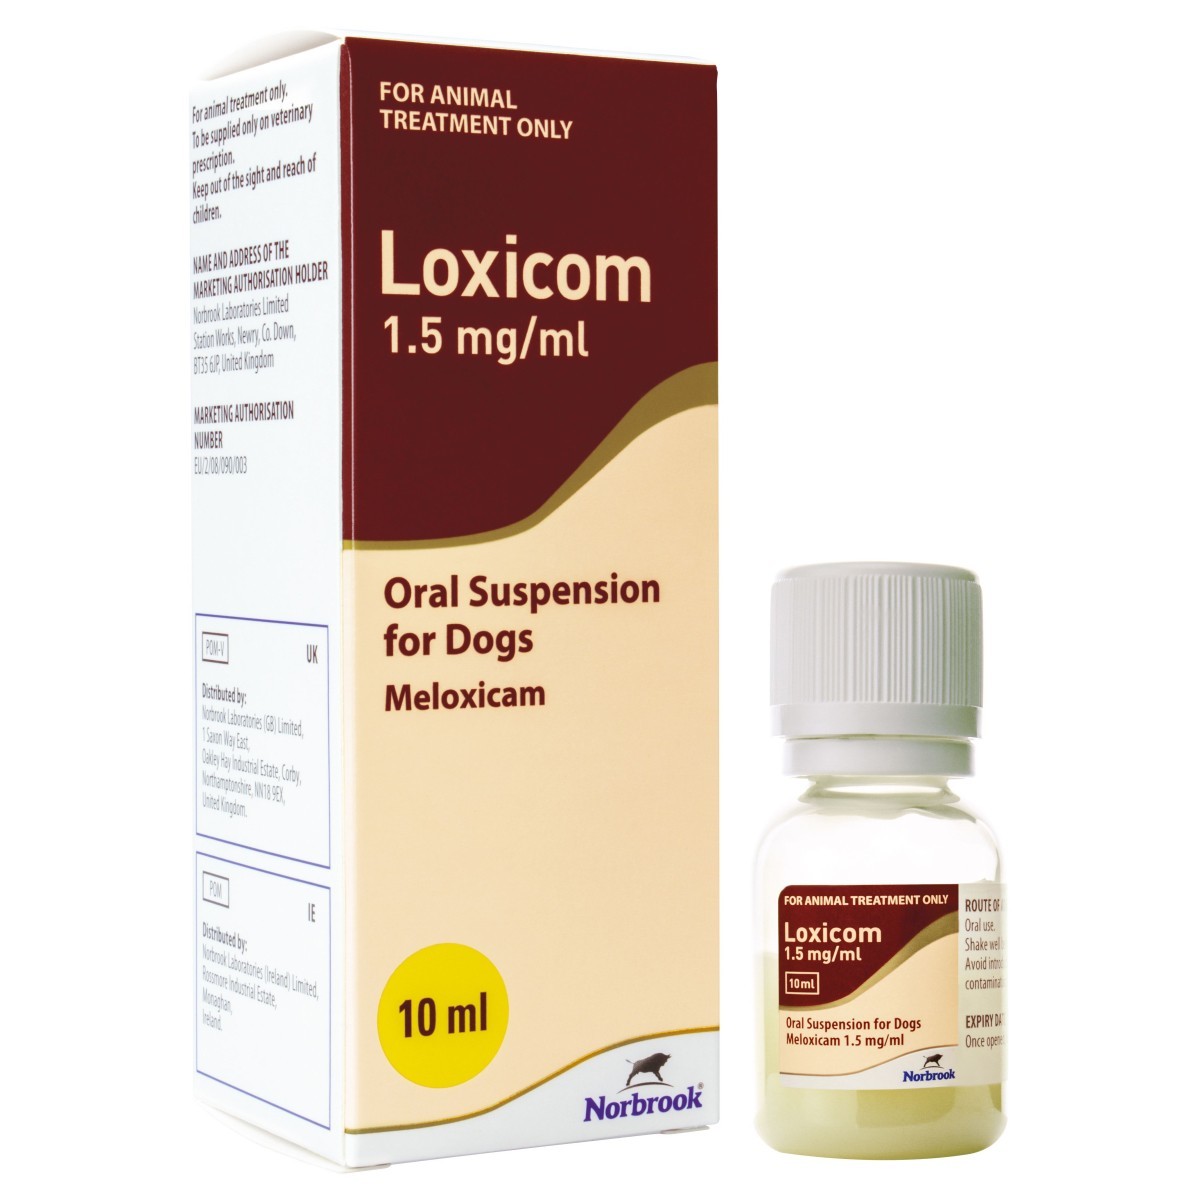 Loxicom 1.5mg/ml Oral Suspension for Dogs - From